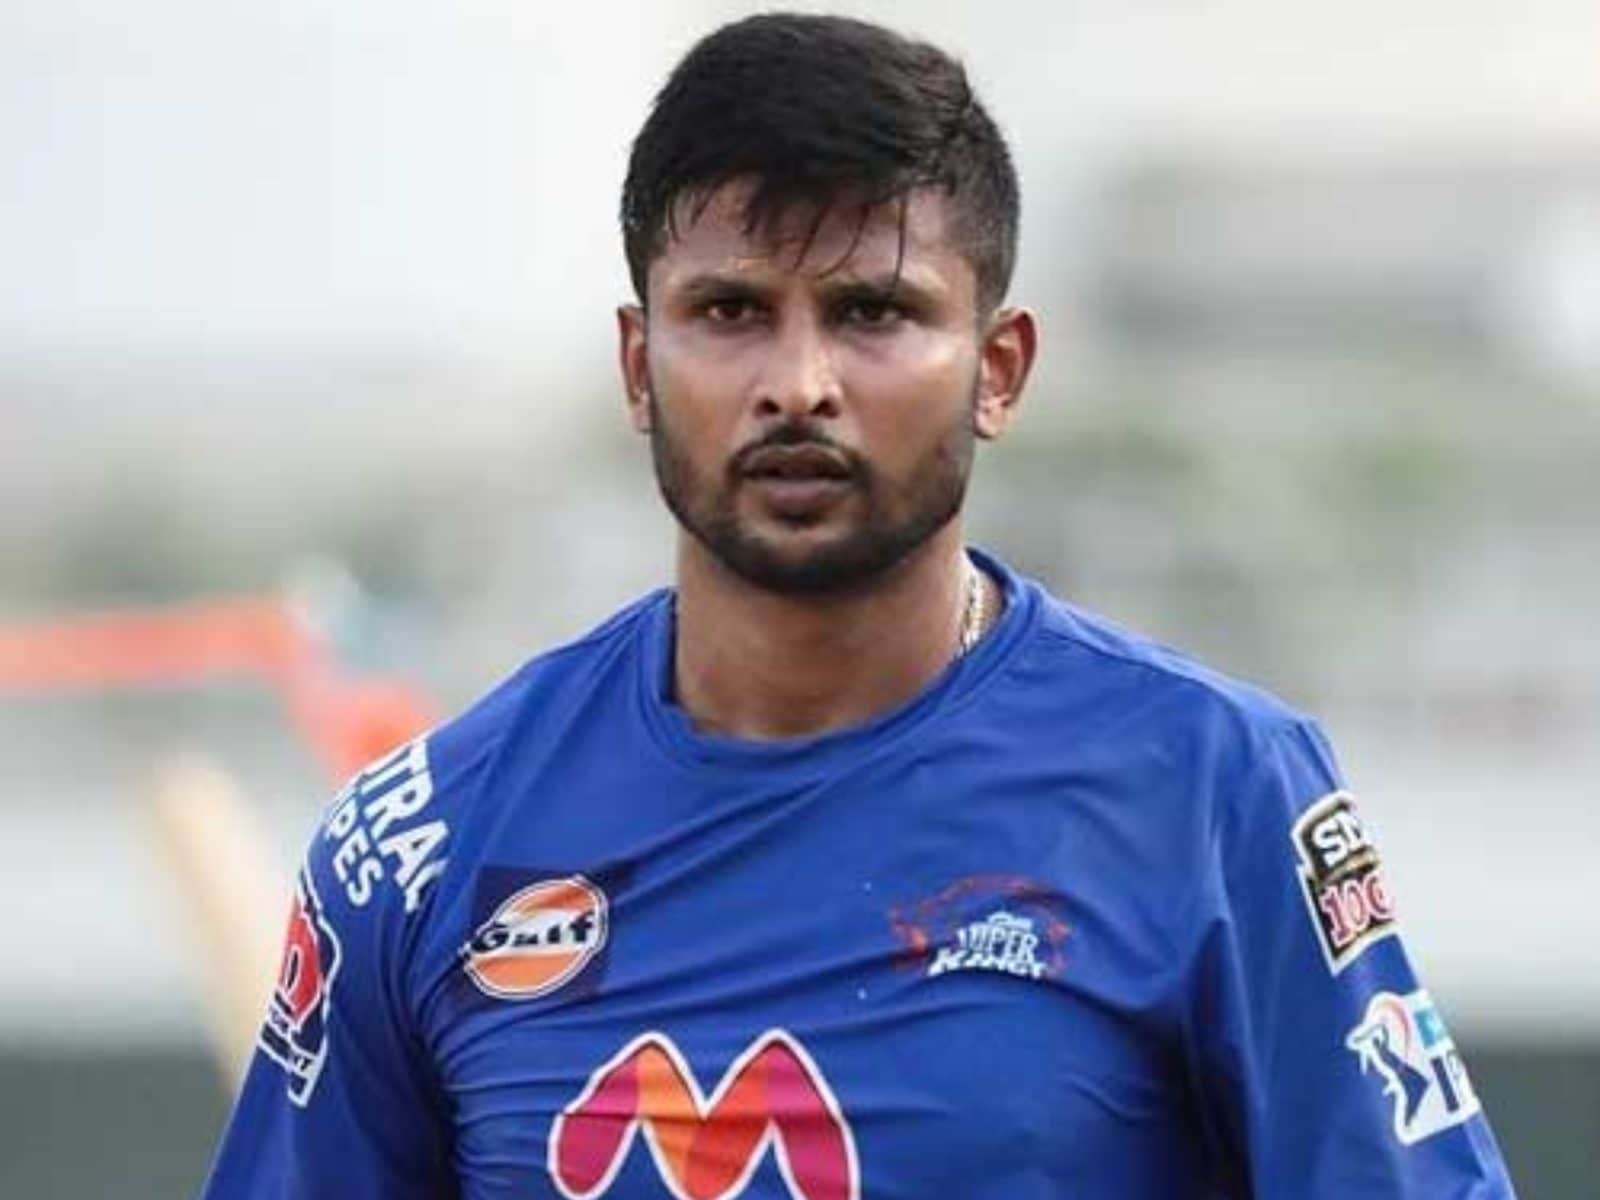 CSK wishes 'speedy recovery' to Krishnappa Gowtham after he tested positive  for coronavirus